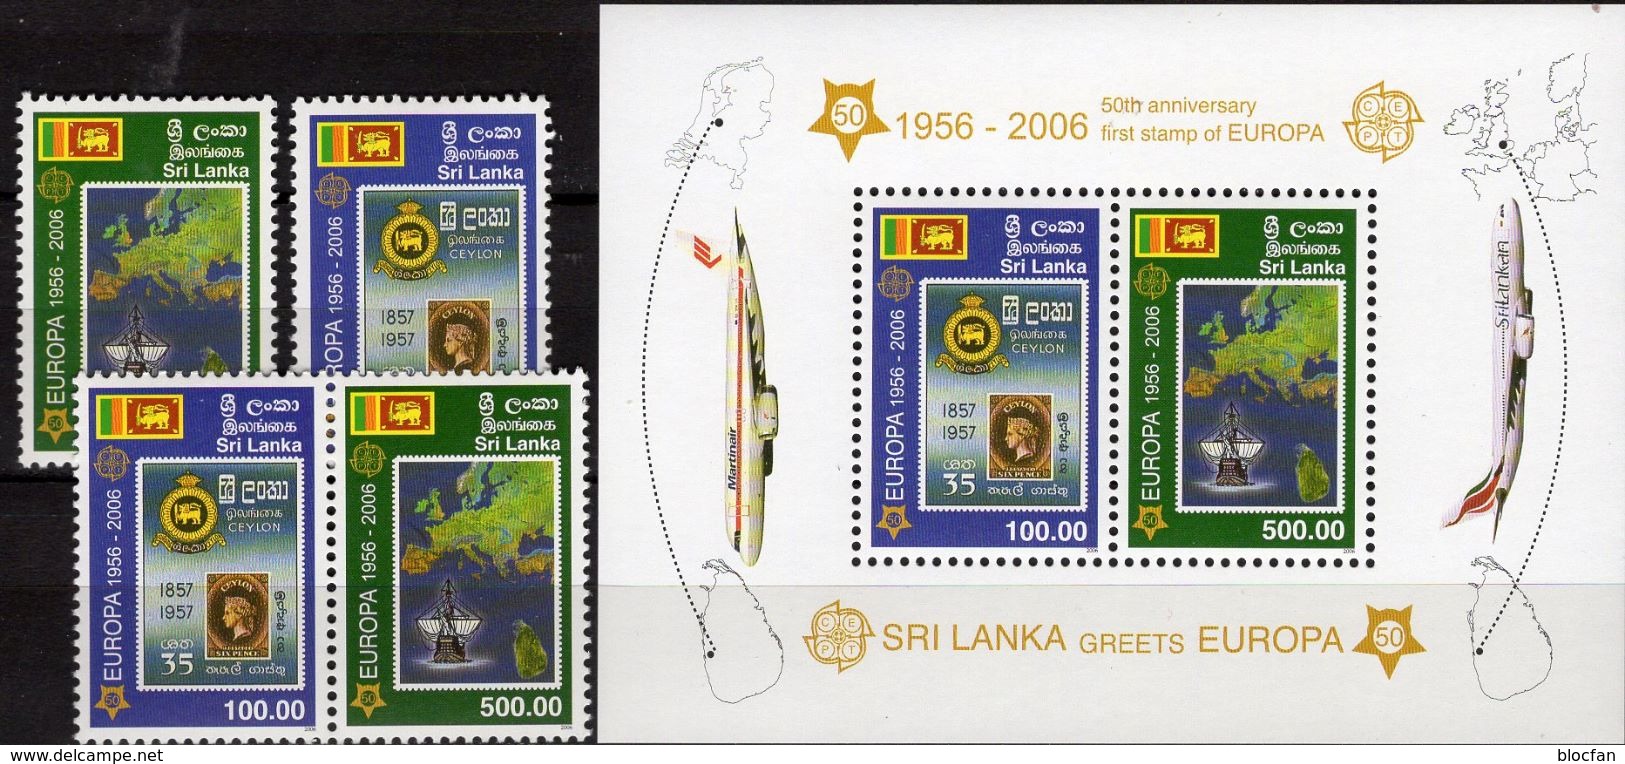 EUROPA Sets 1965+Georgien 507/4A/B,Blocks 35-38 ** 63€ Blocs S/s Sheets Zweige Mit Frucht M/s Bf 50 Years CEPT 2006 - Collections, Lots & Séries